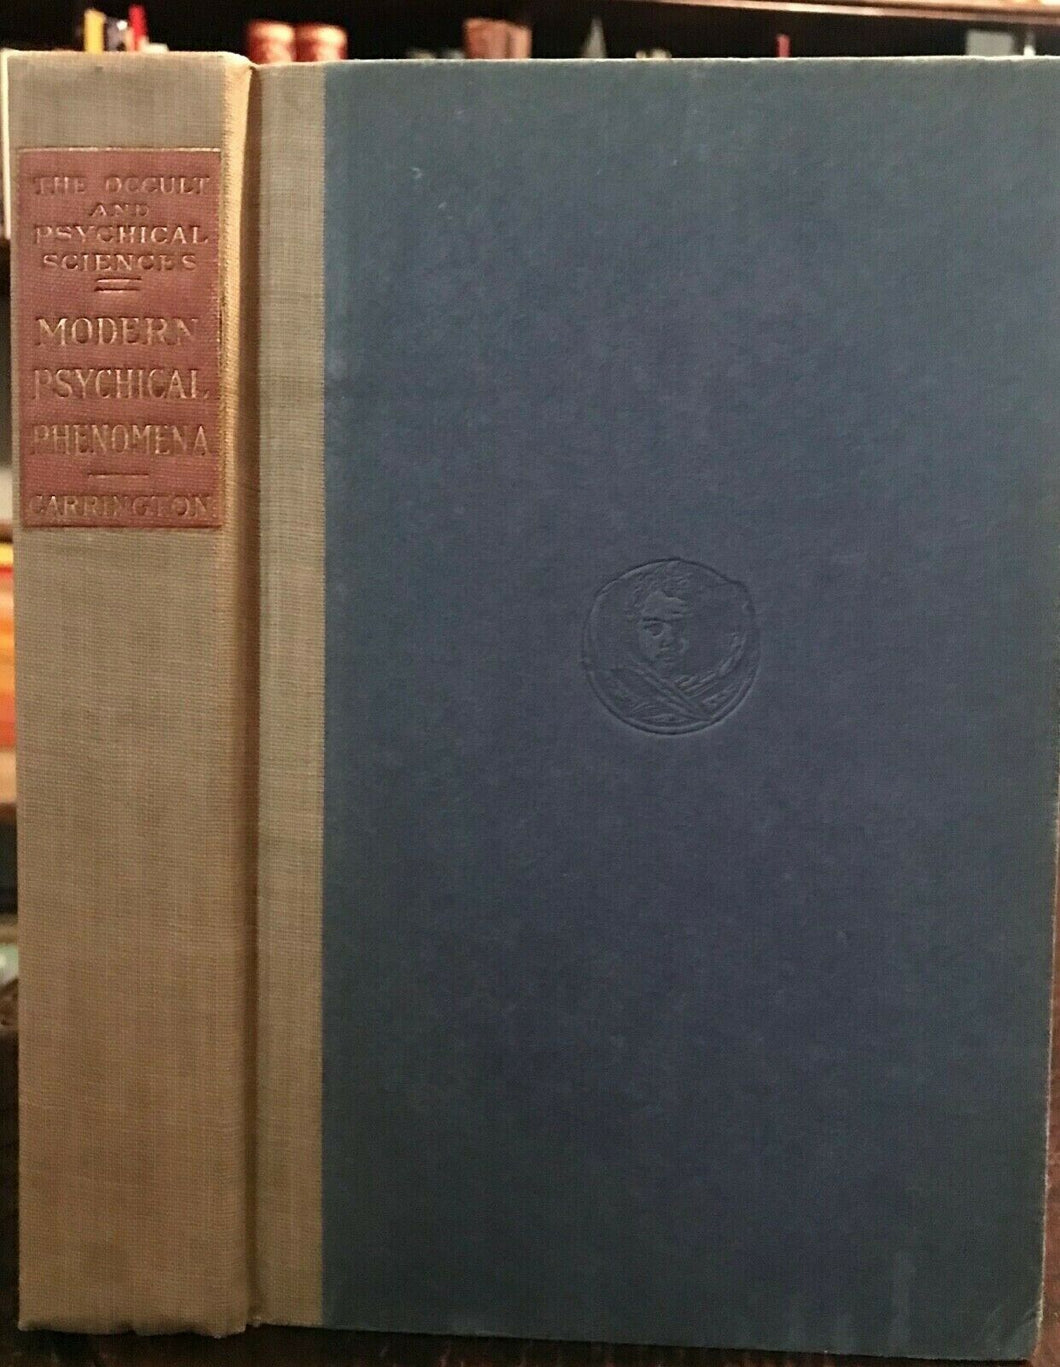 MODERN PSYCHICAL PHENOMENA - Carrington, 1920 - OCCULT DIVINATION GHOSTS